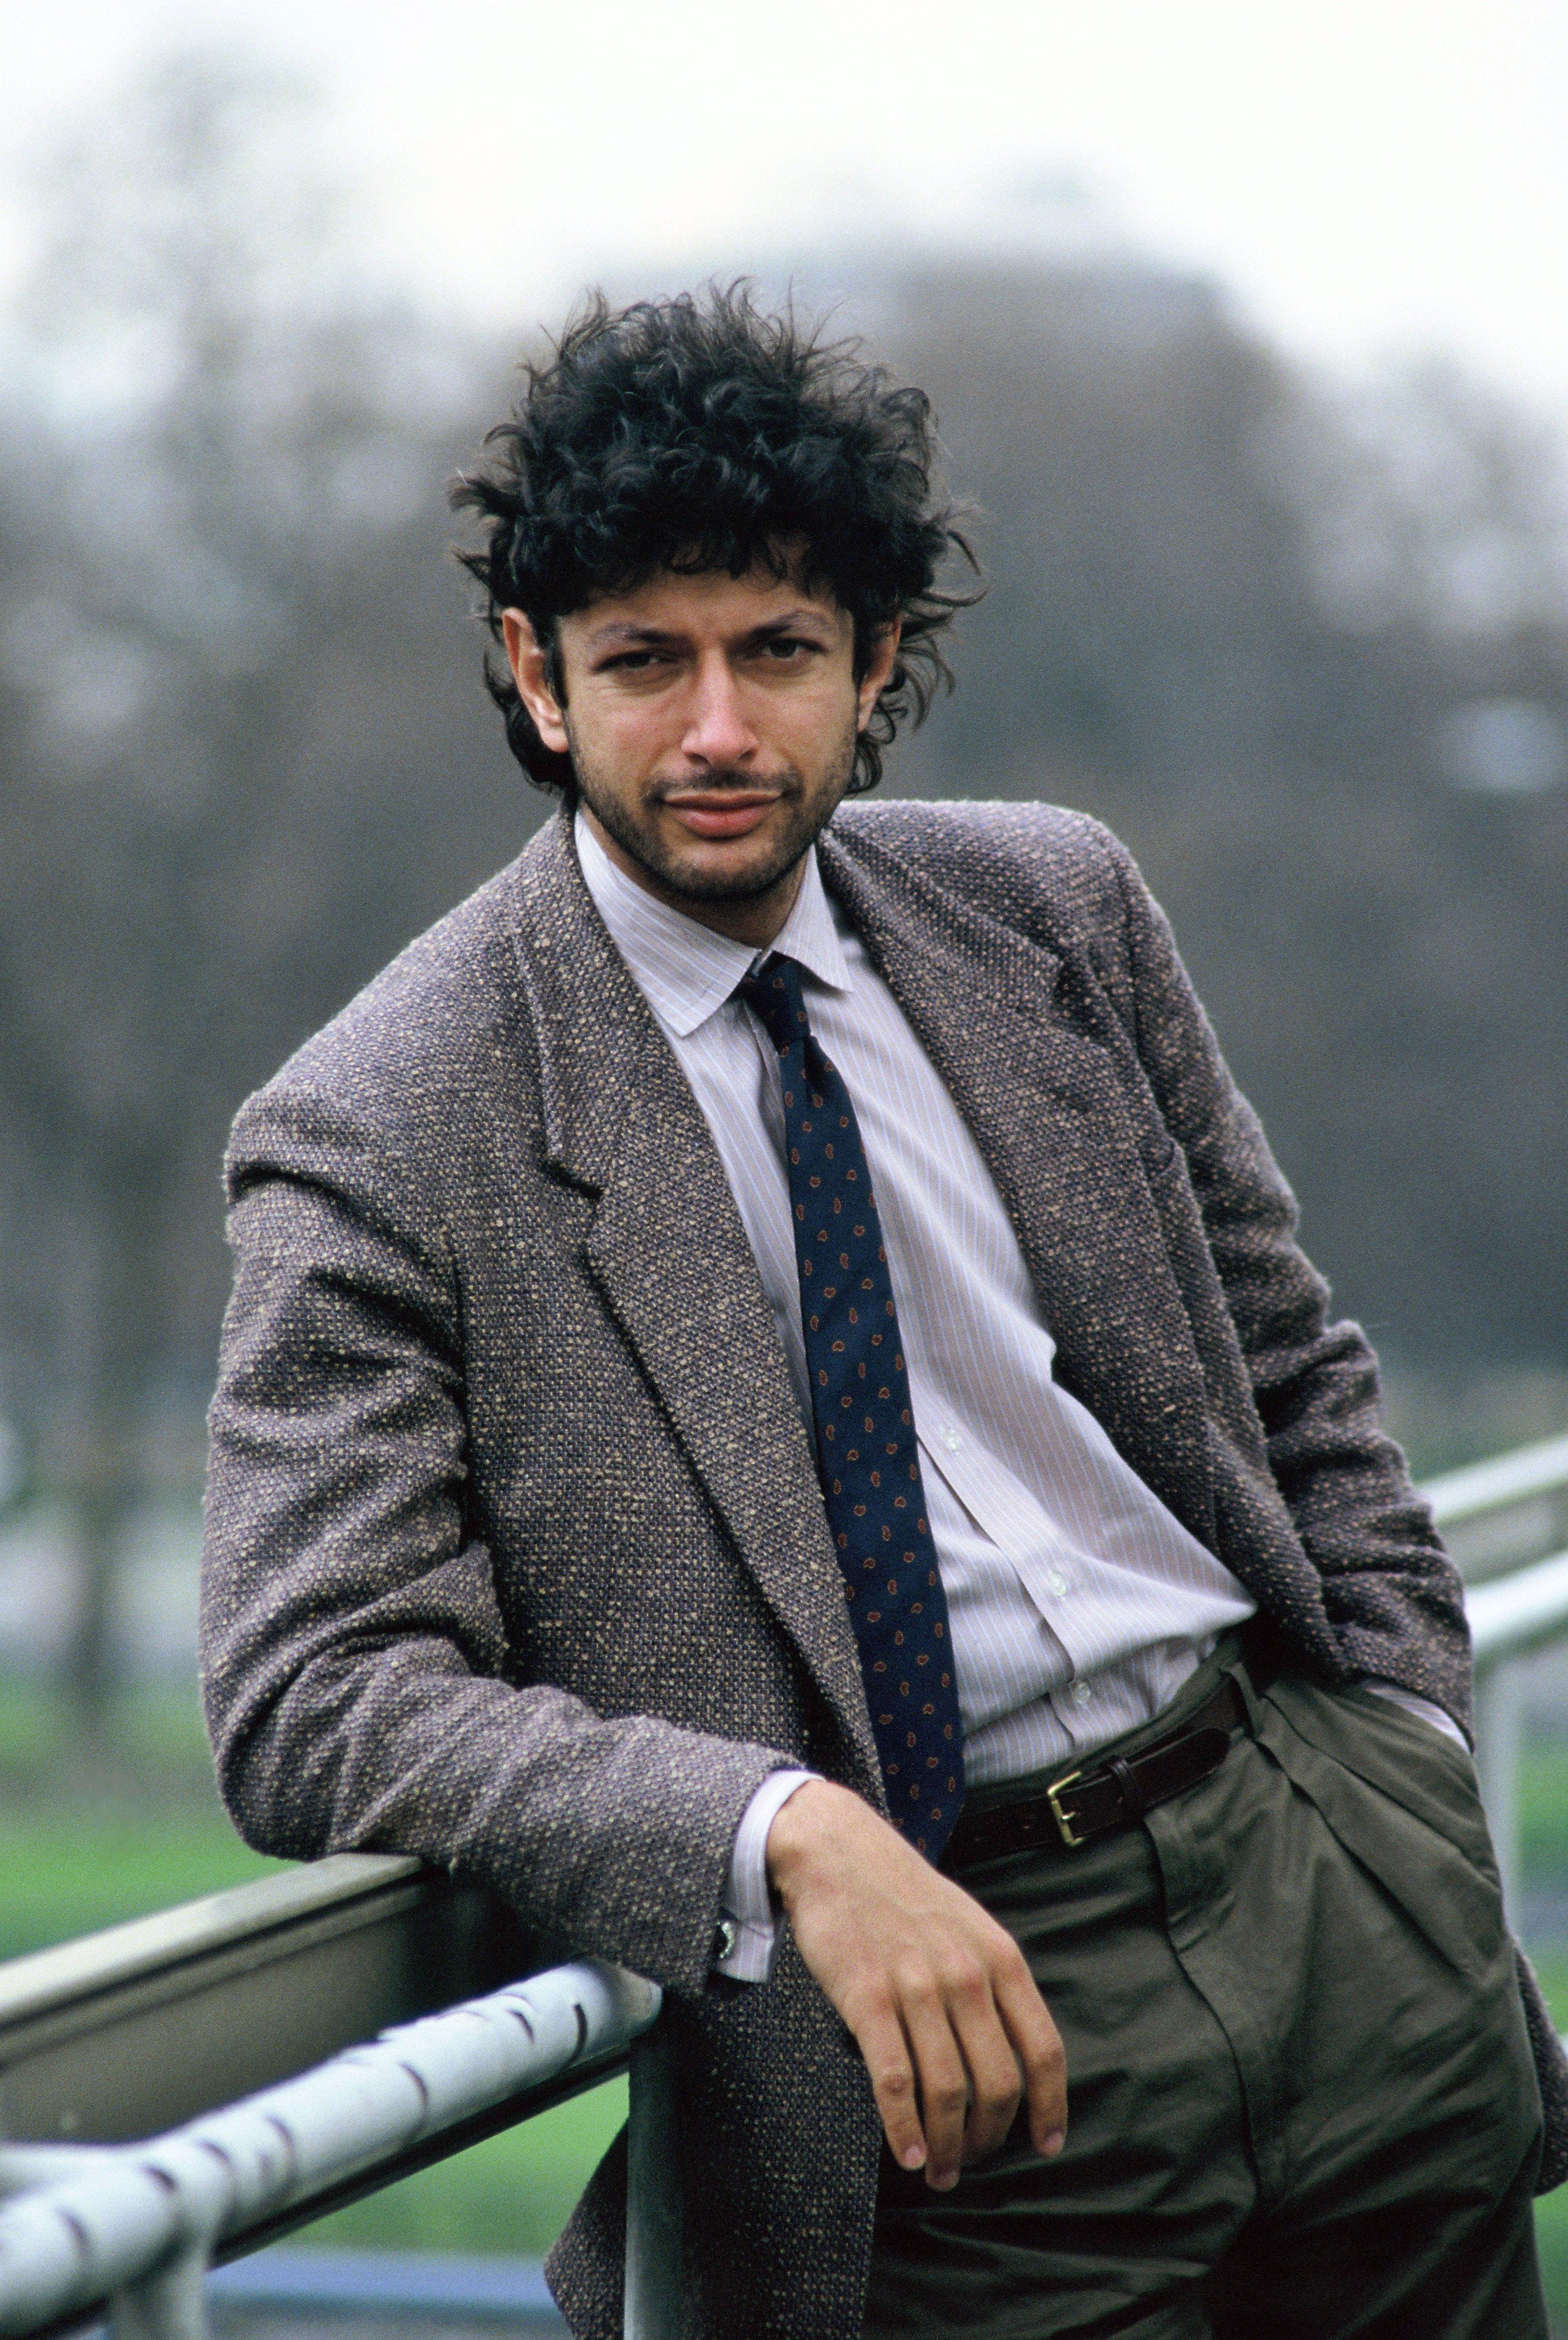 Jeff Goldblum poses on set during filming of 'Into The Night', directed by John Landis, on April 1985 in London, England. | Source: Getty Images